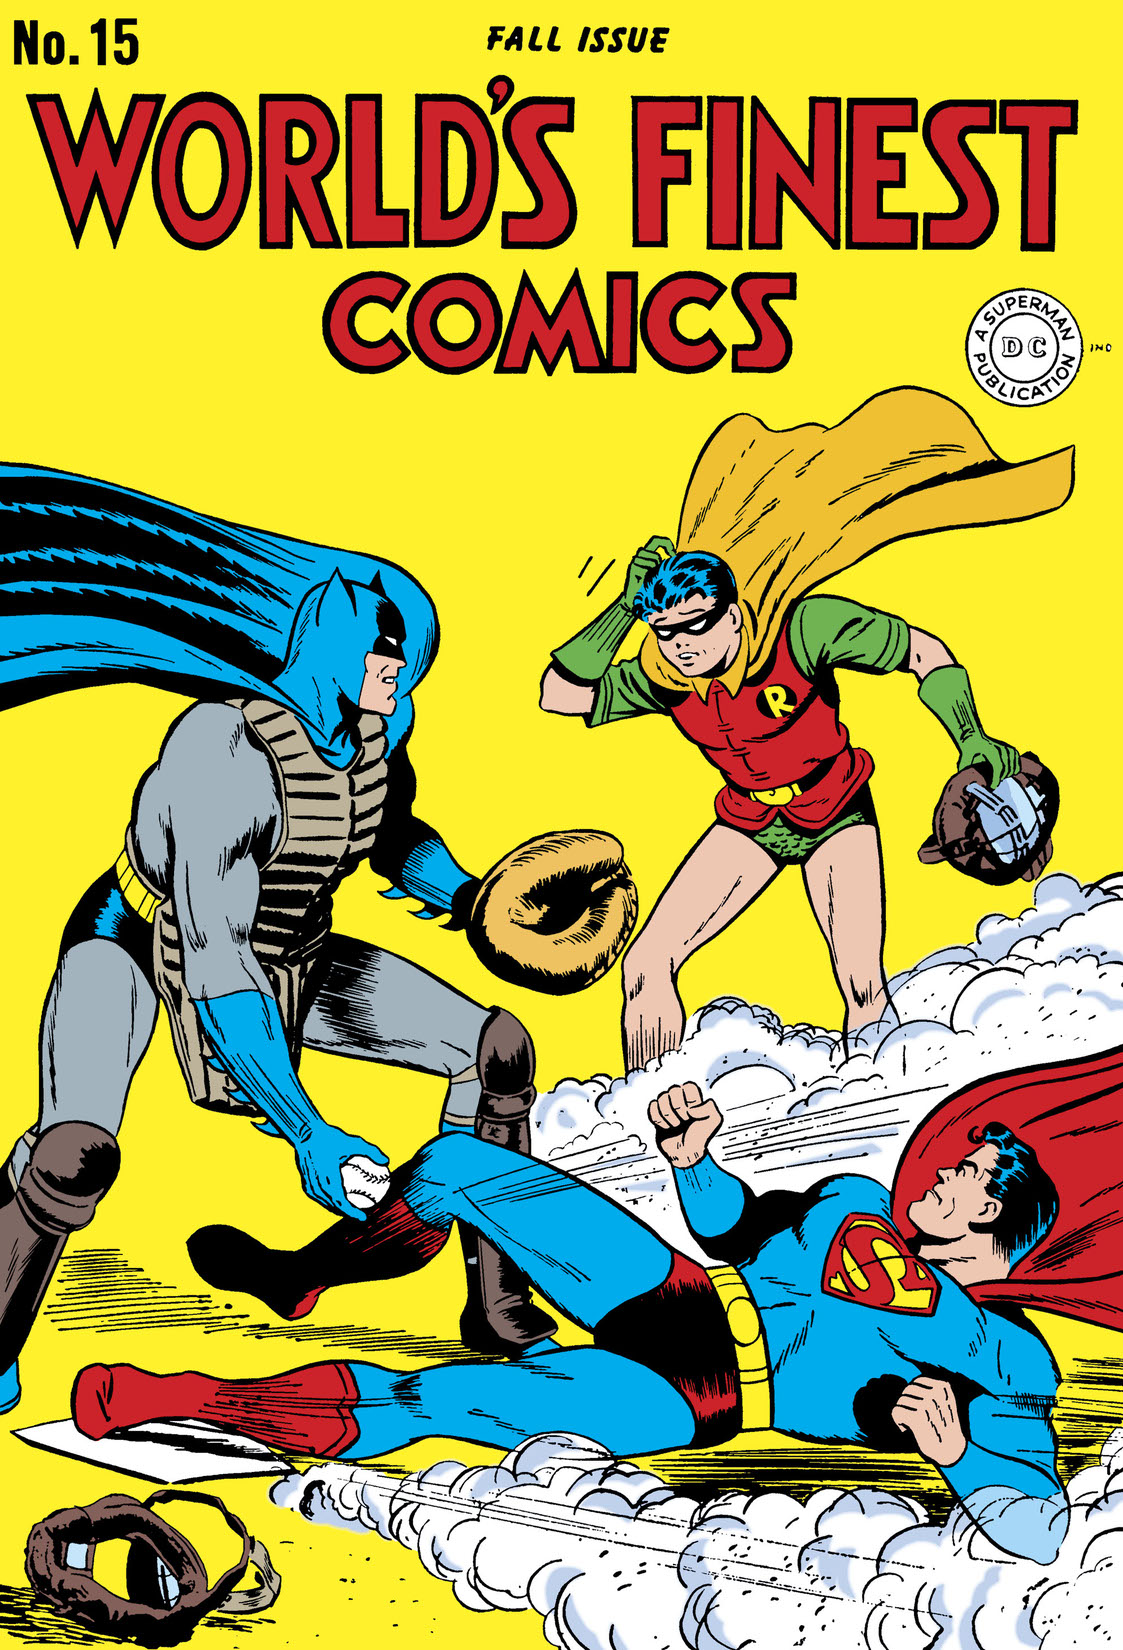 World's Finest Comics (1941-) #15 preview images